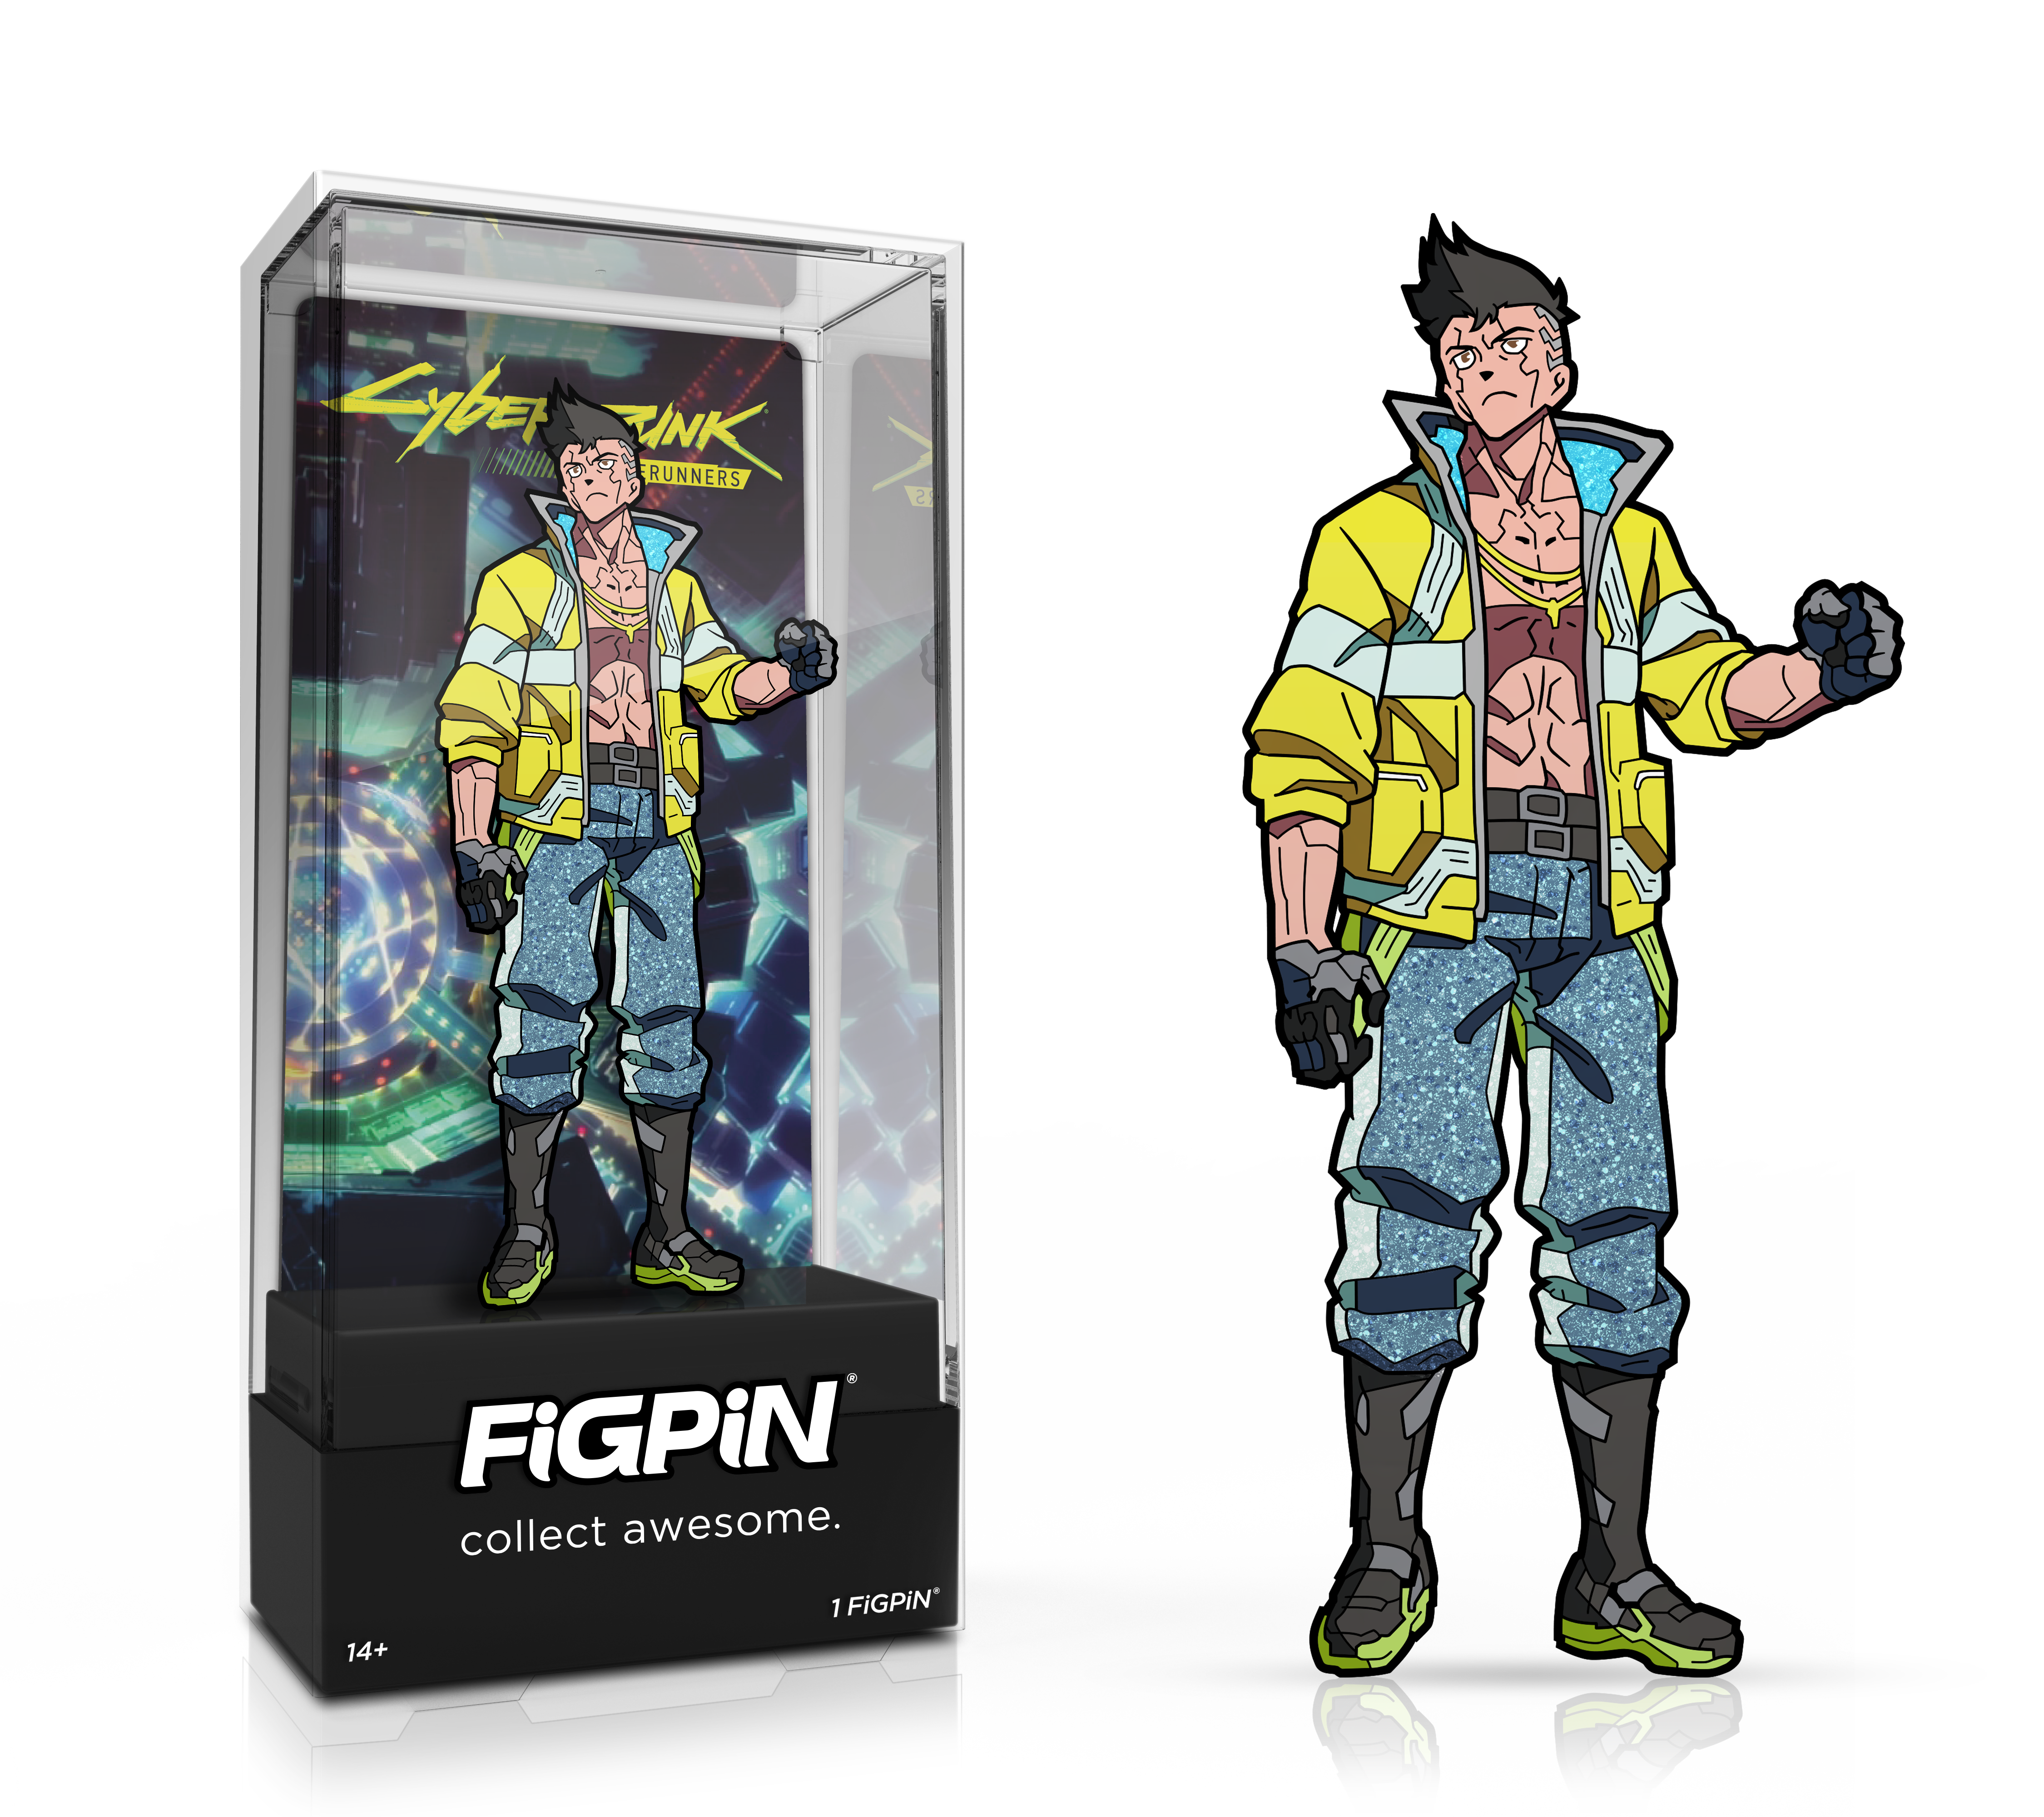 Side by side view of the David Martinez enamel pin in display case and the art render.